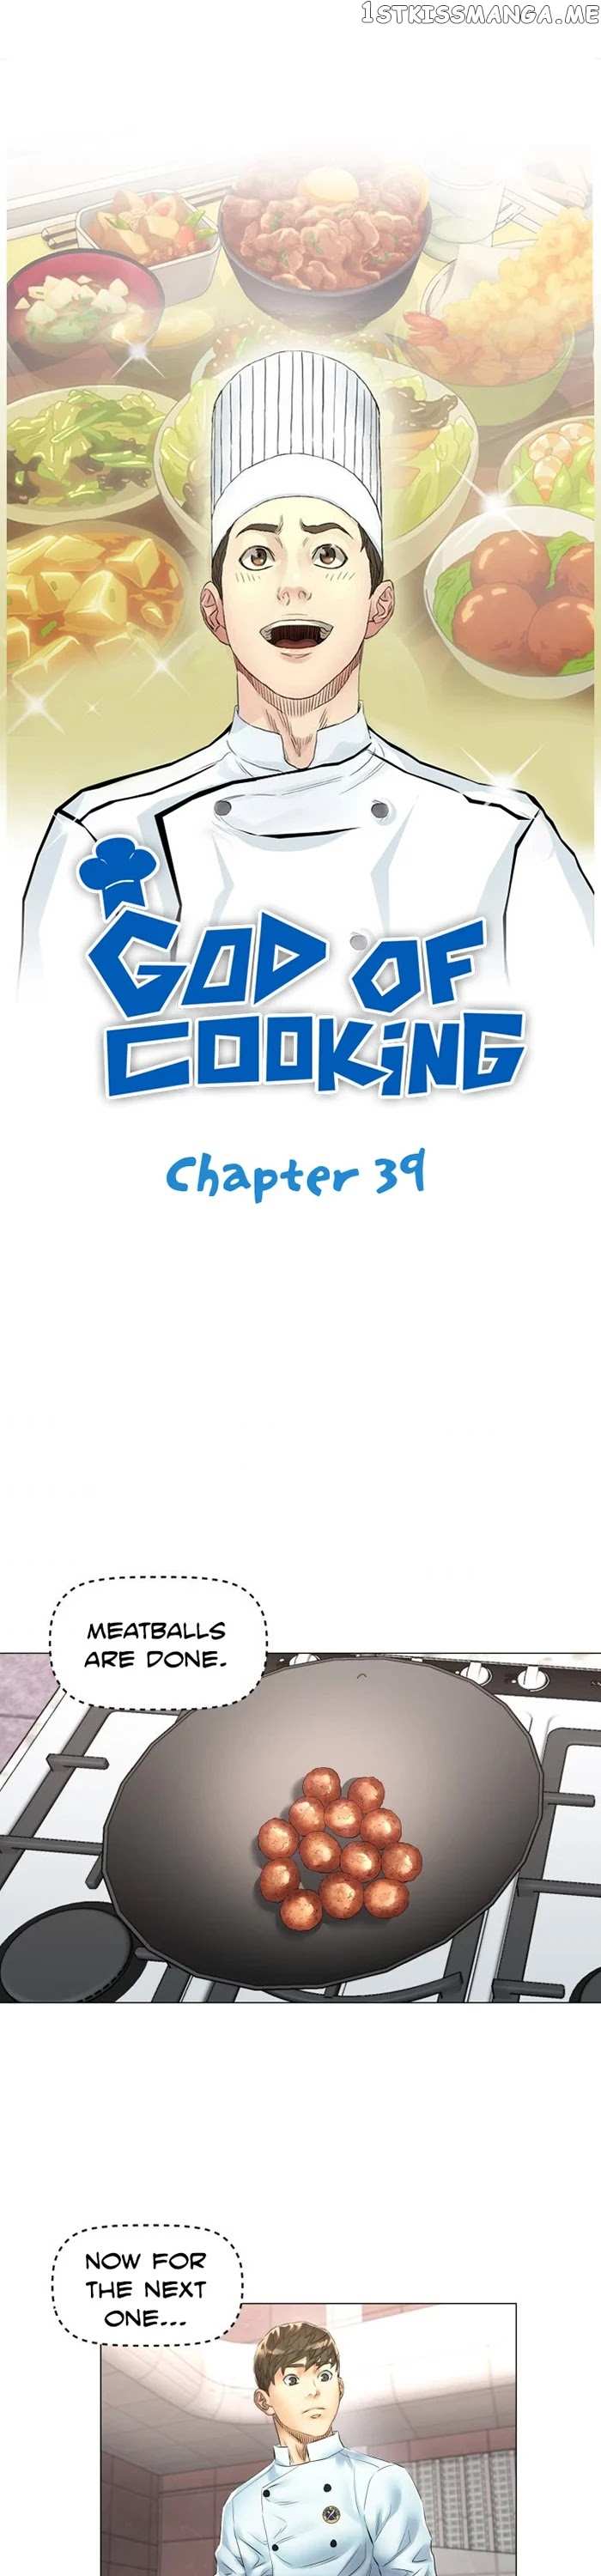 God of Cooking chapter 39 - page 1